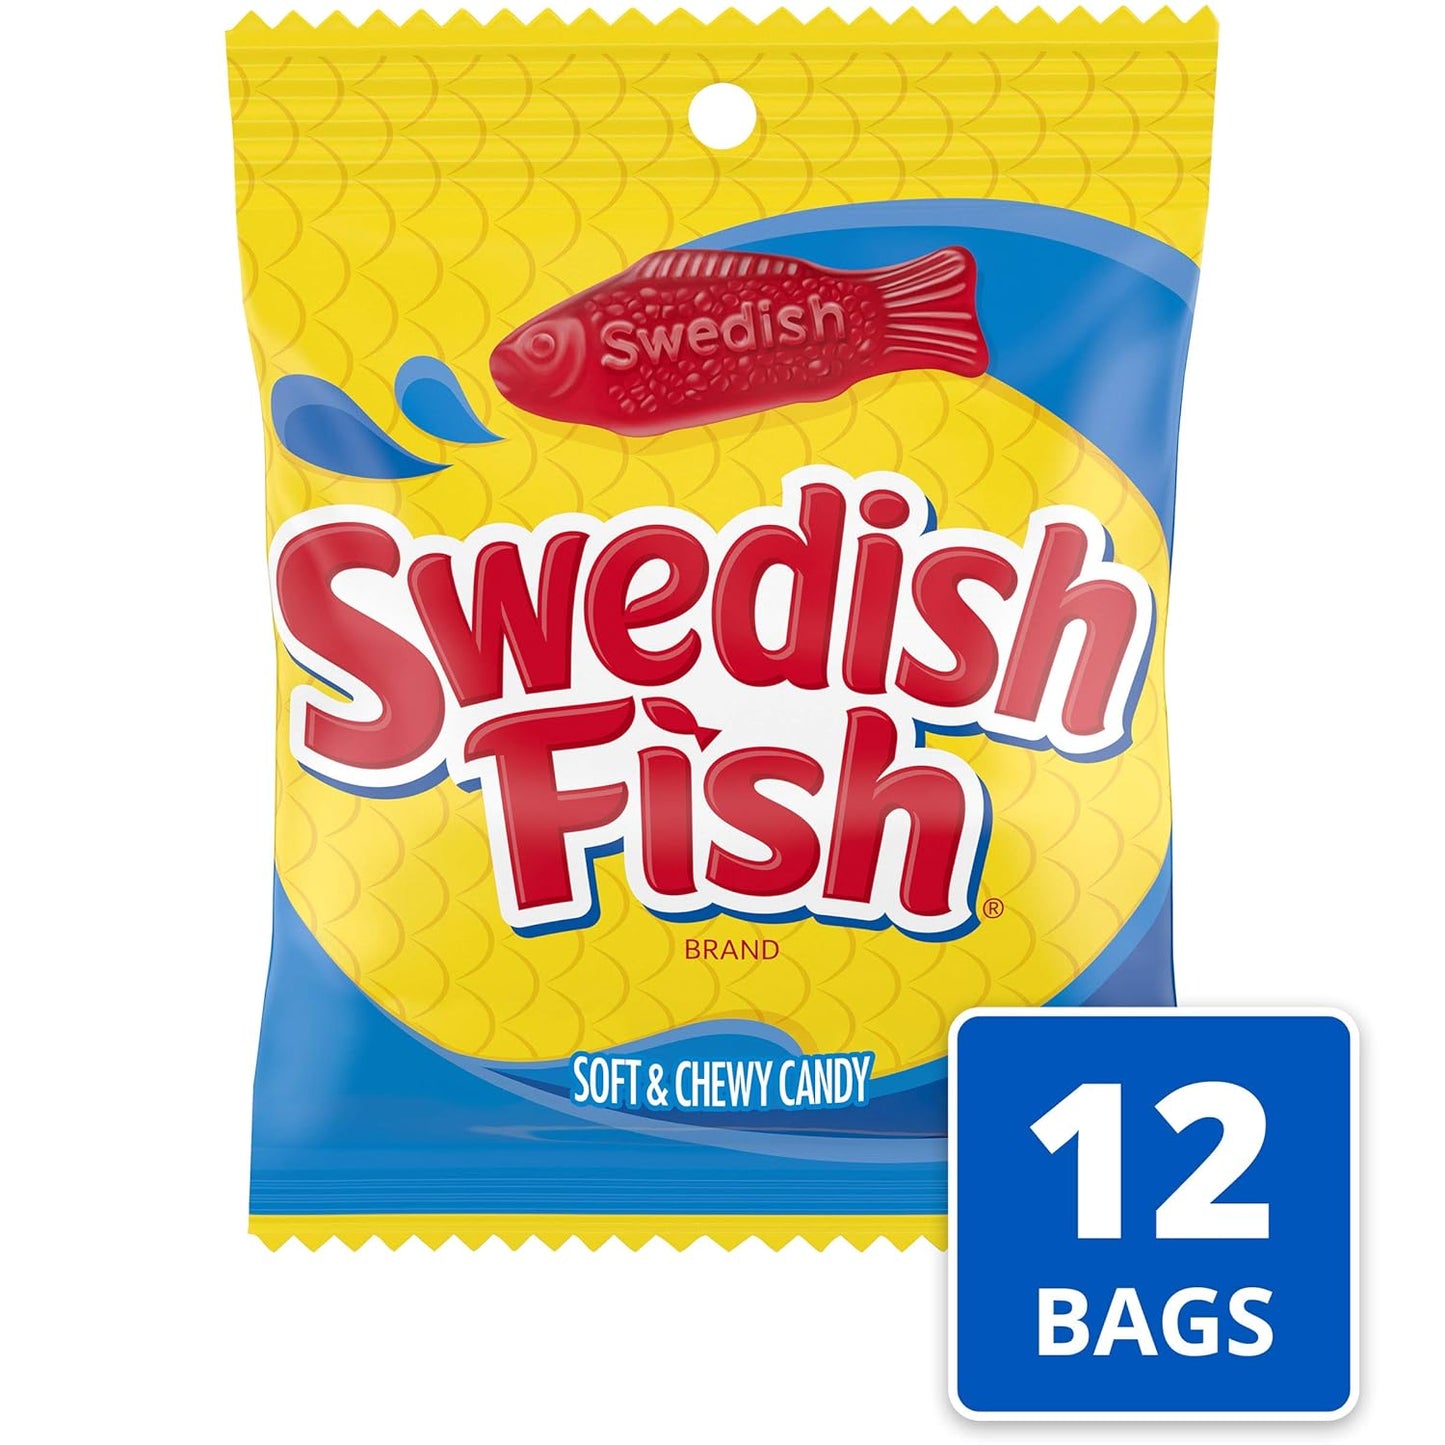 SWEDISH FISH Soft & Chewy Candy, 12 Ct 3.6 oz Bags - USA